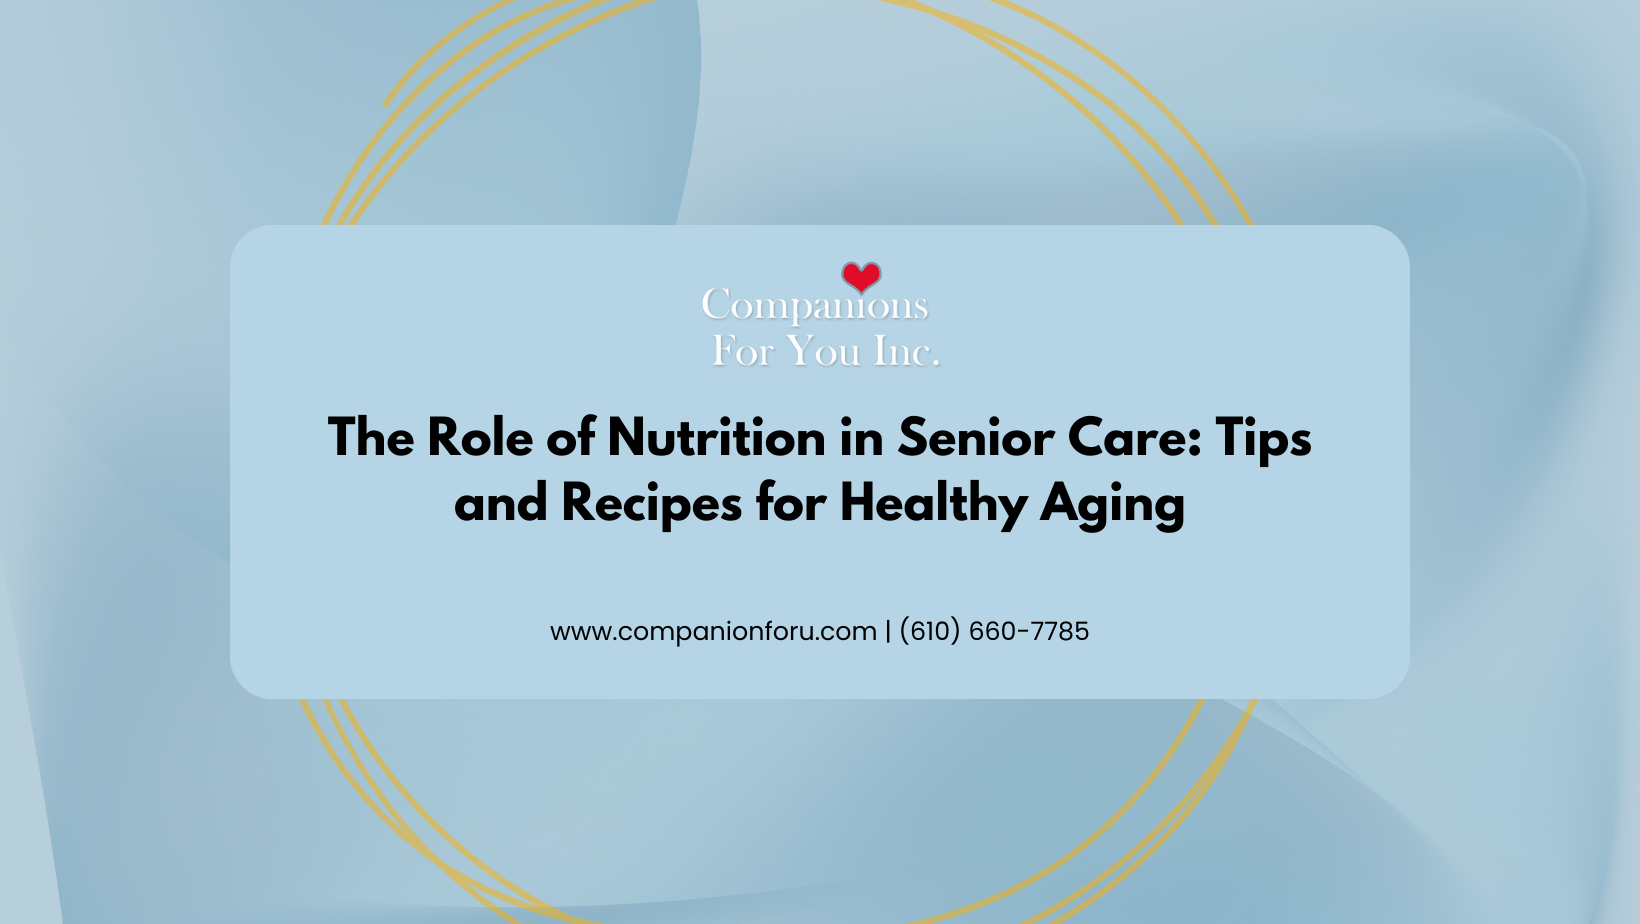 The Role of Nutrition in Senior Care: Tips and Recipes for Healthy Aging